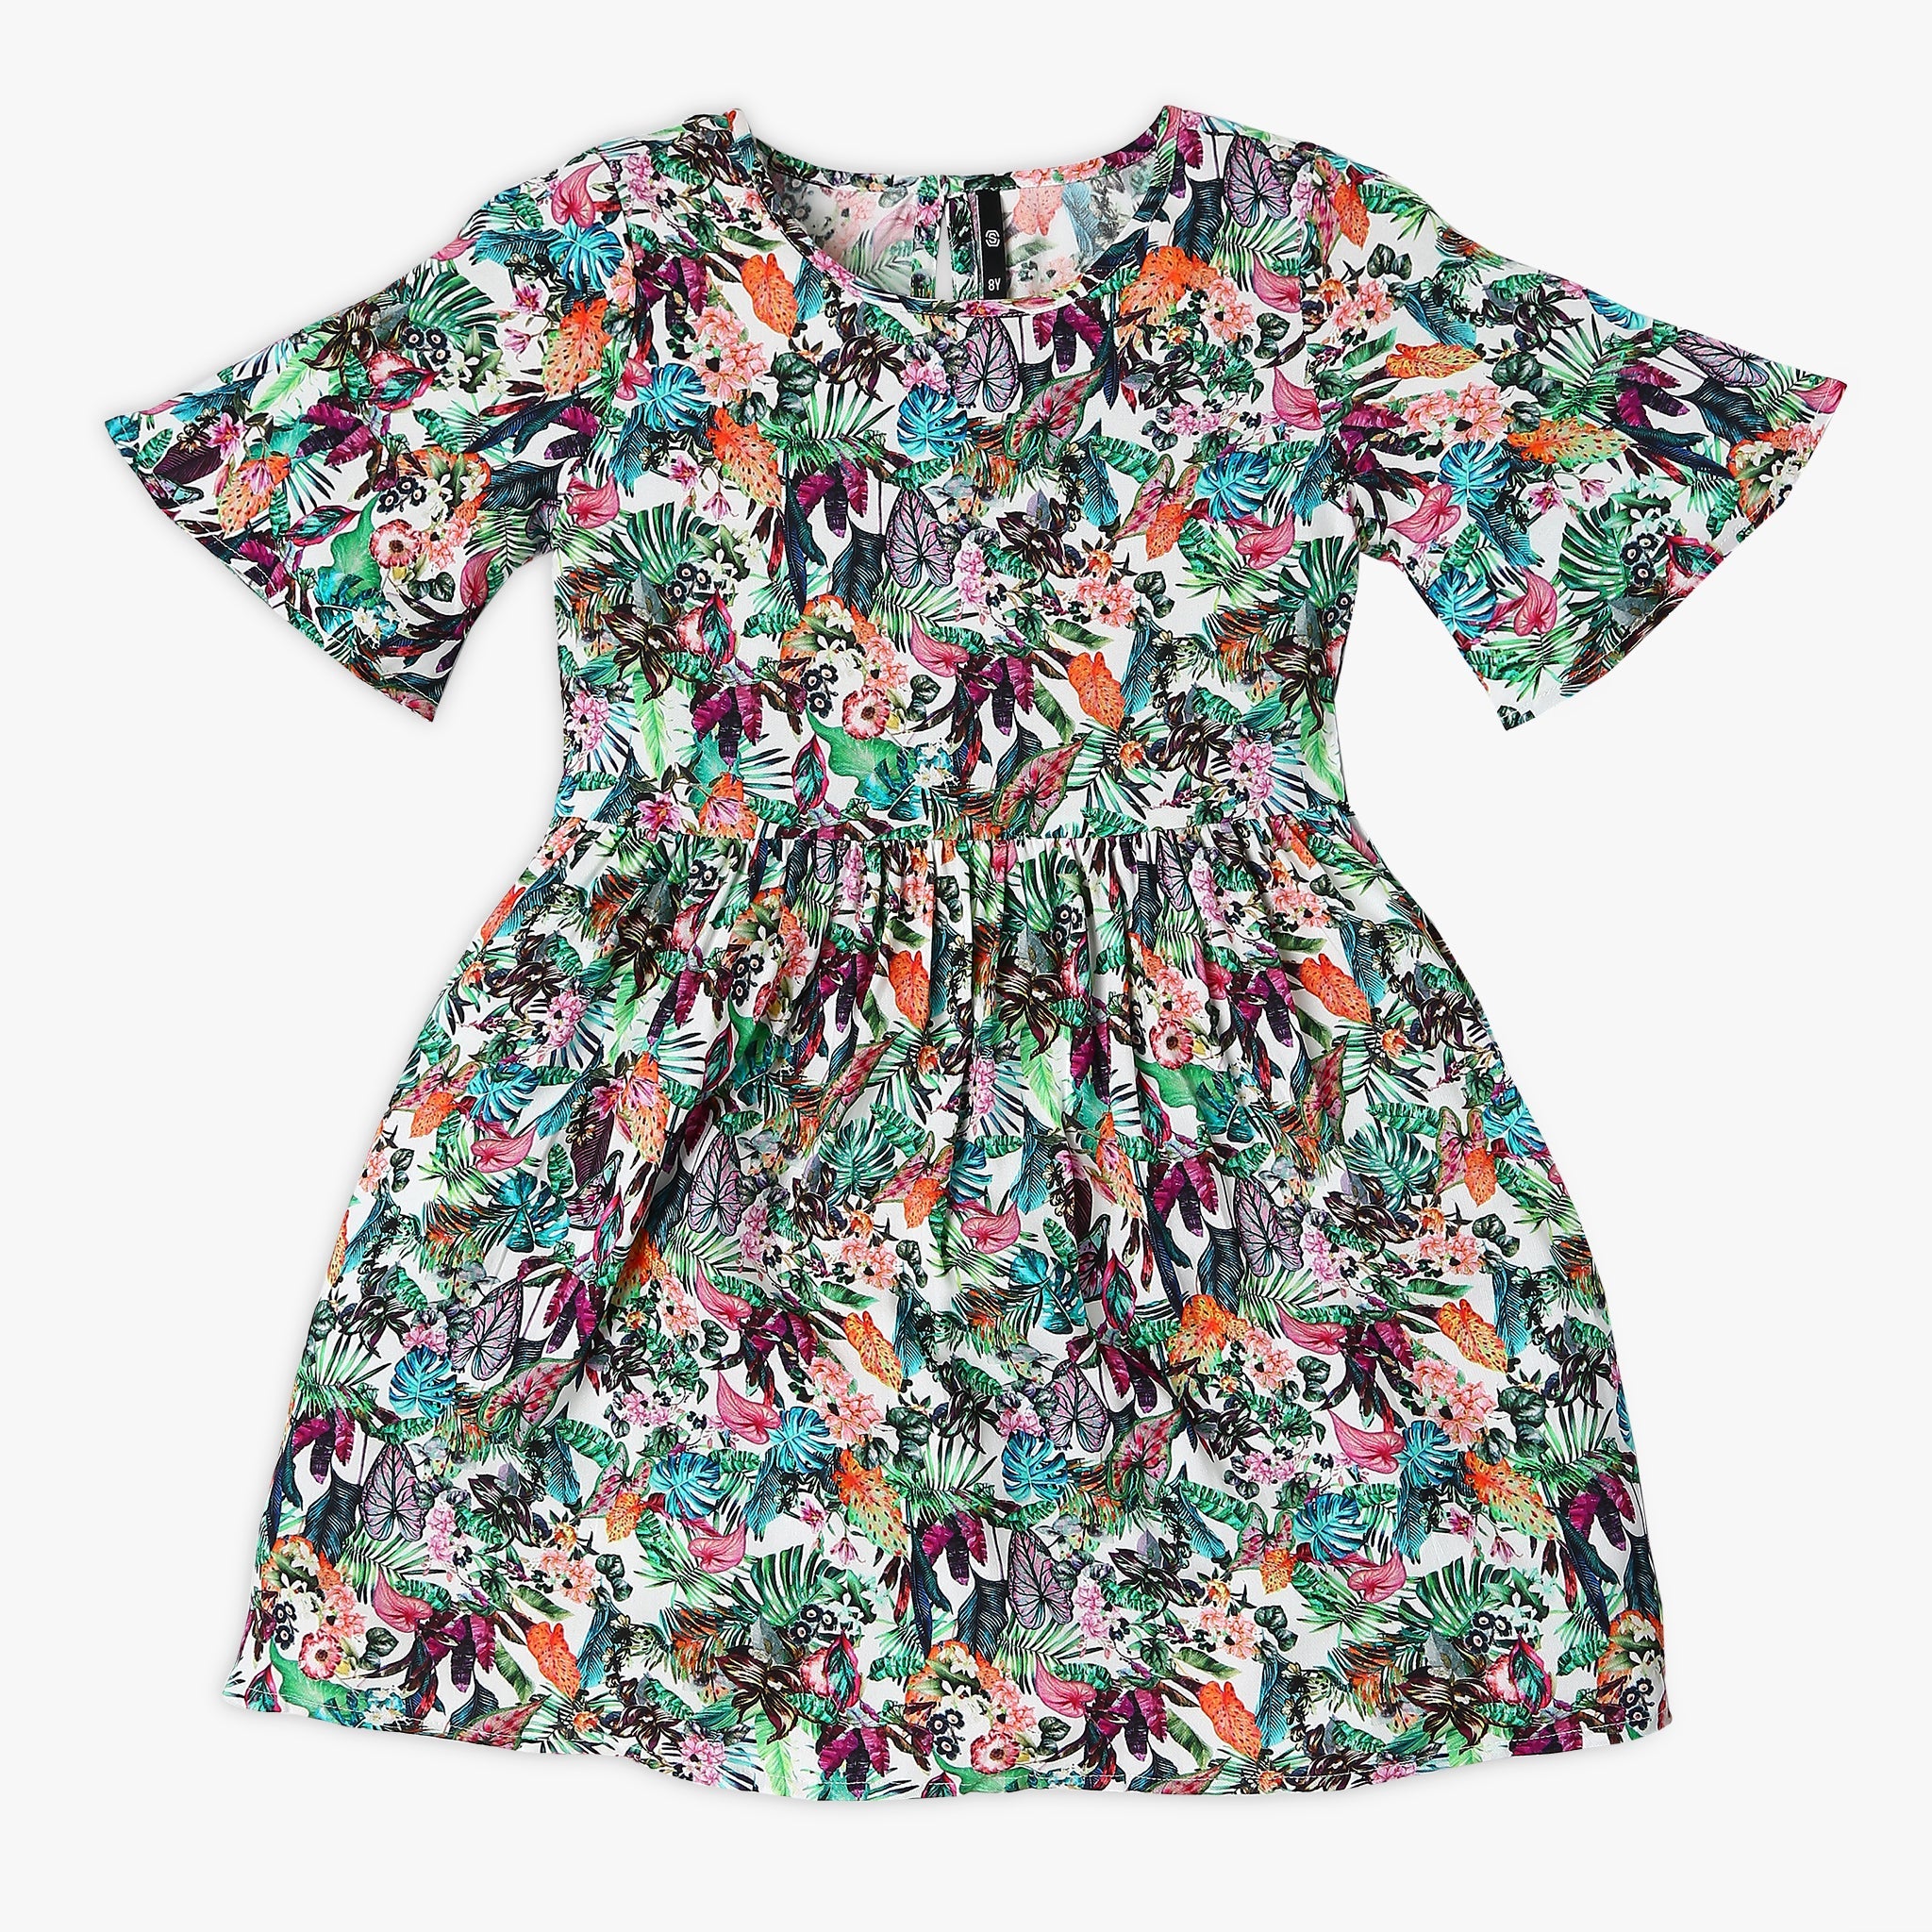 Regular Wear Kids Girls Dress 16 to 26Size at Rs.335/Piece in indore offer  by Daga Impex